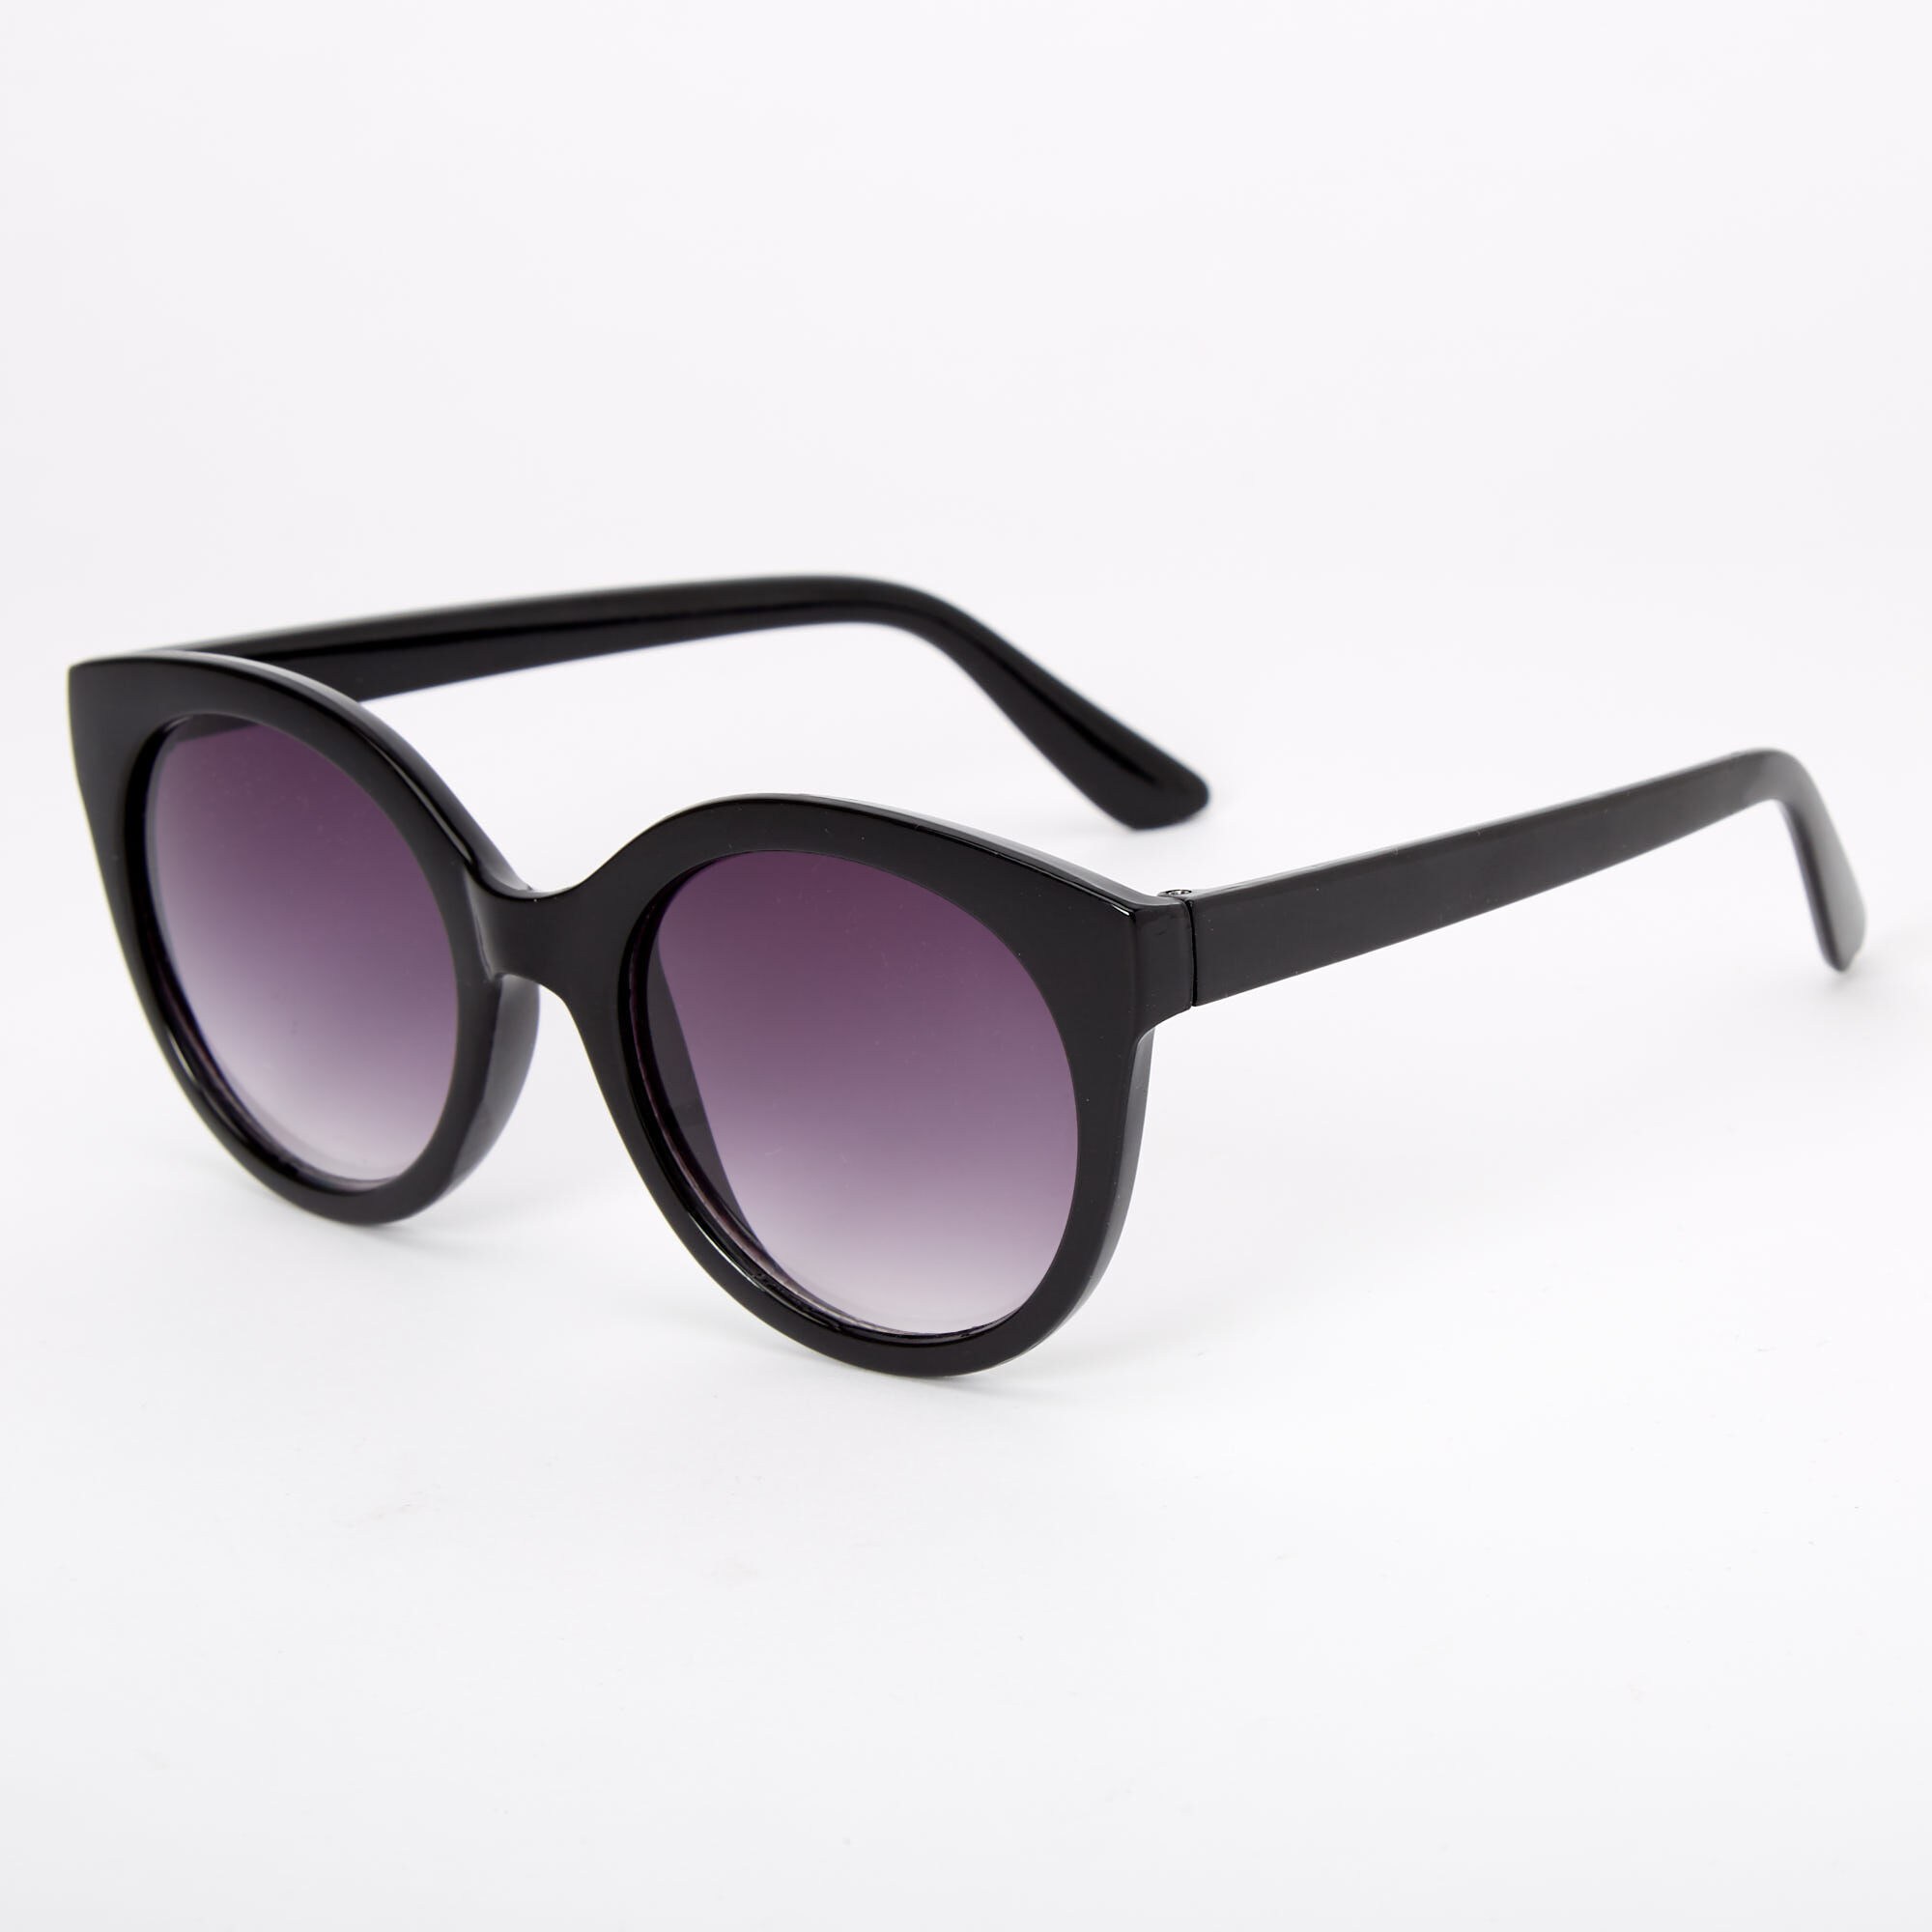 View Claires Rounded Mod Sunglasses Black information